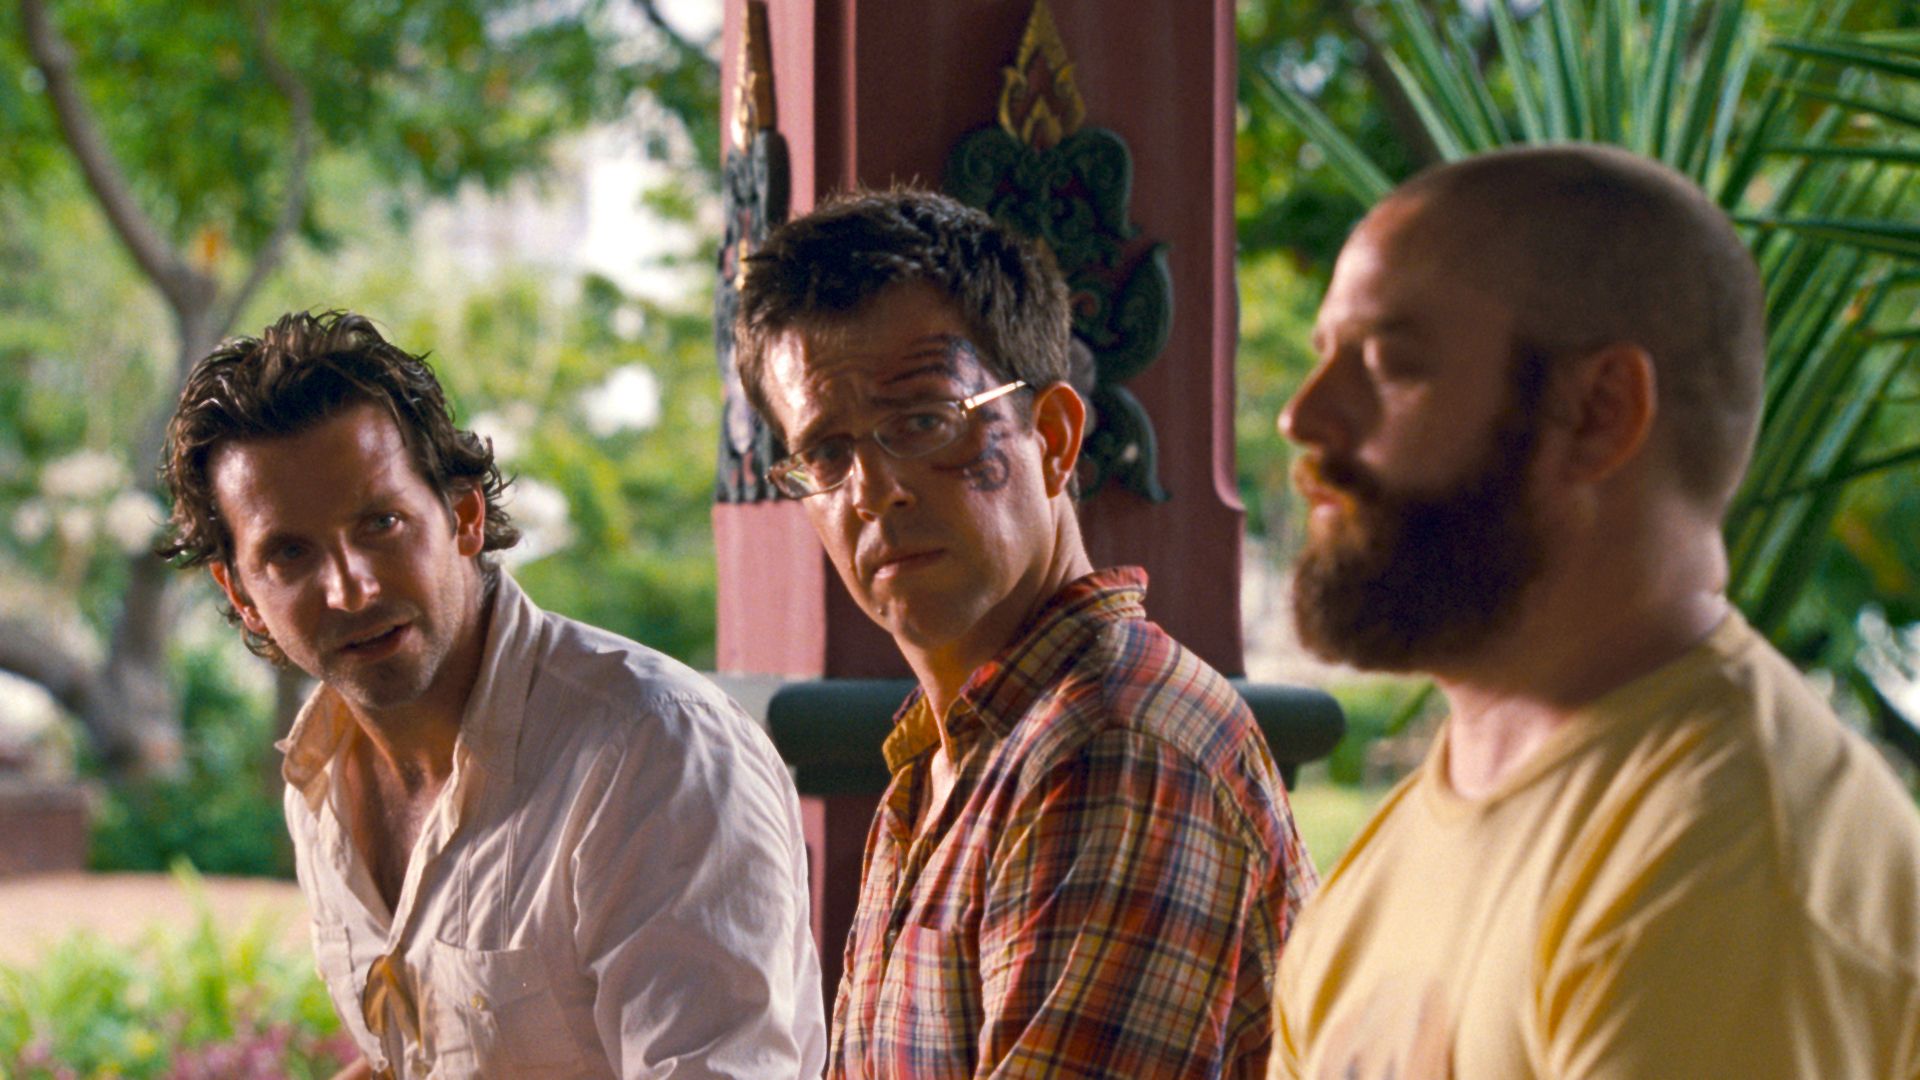 Bradley Cooper, Ed Helms and Zach Galifianakis in The Hangover Part II